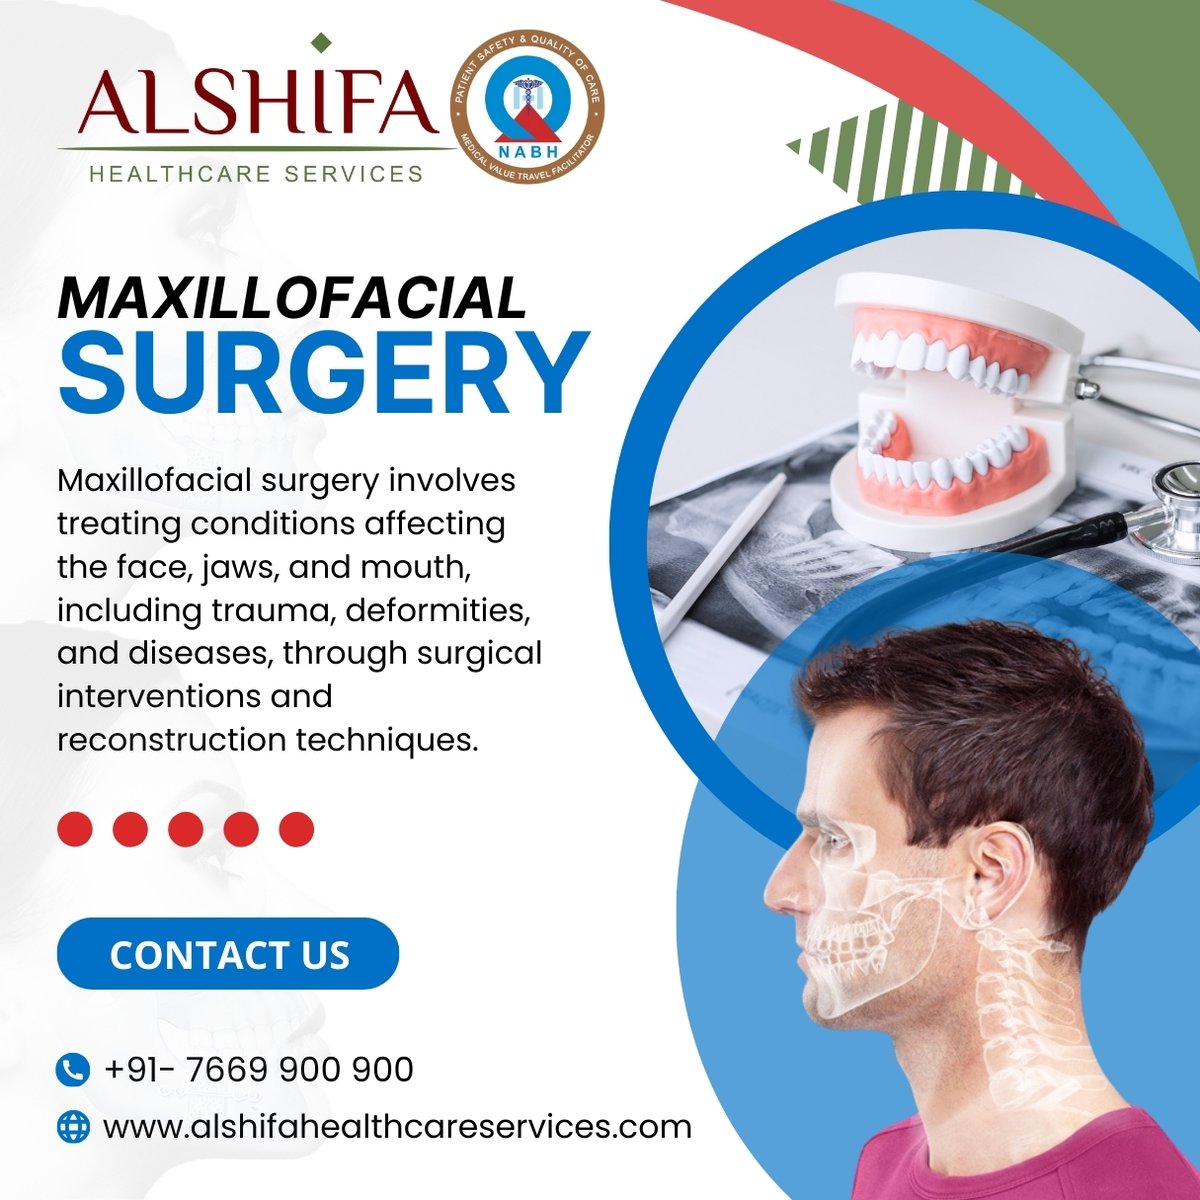 #maxillofacialsurgery involves treating #injuries, #Diseases, and defects in the #head, neck, face, jaws, and the hard and soft tissues of the oral and #maxillofacial region through #surgical intervention. 

#MedicalTourism #alshifahealthcareservices #alshifa